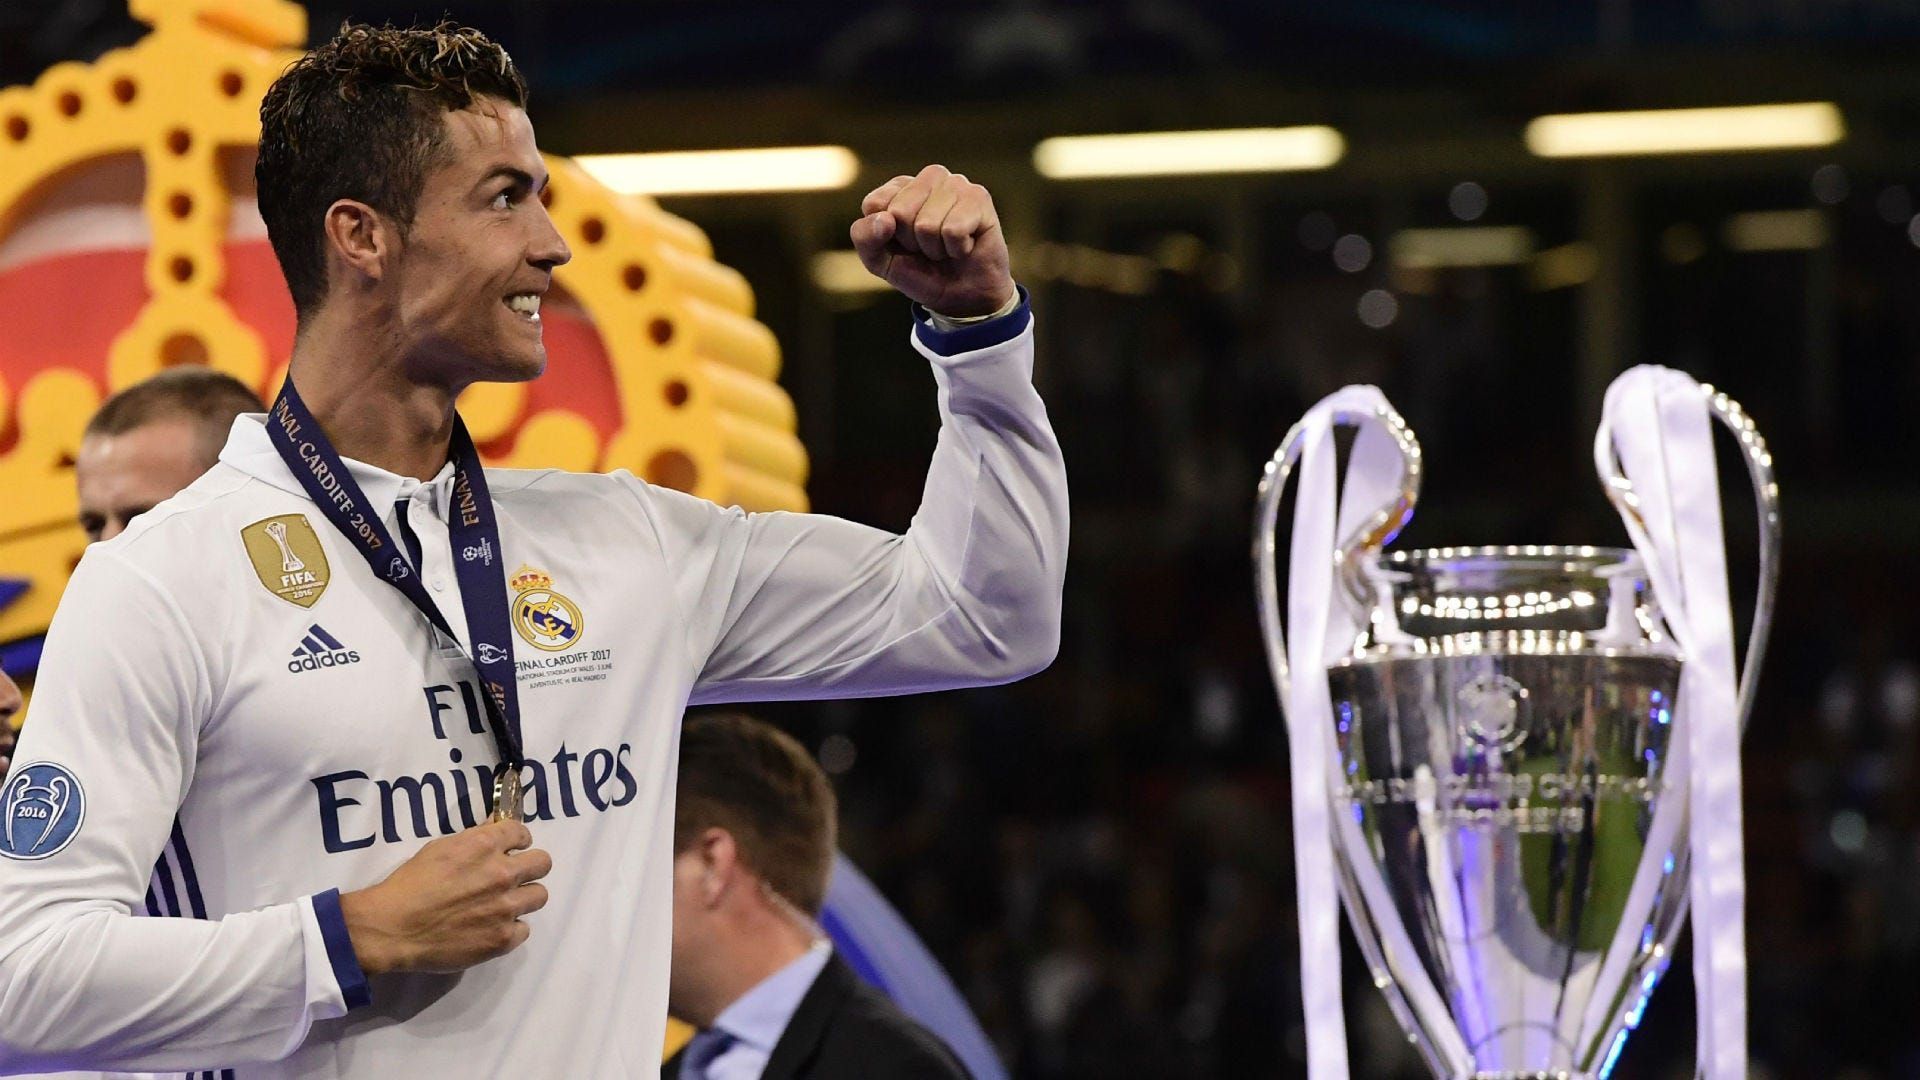 Cristiano Ronaldo after winning his 4th Champions League in Cardiff